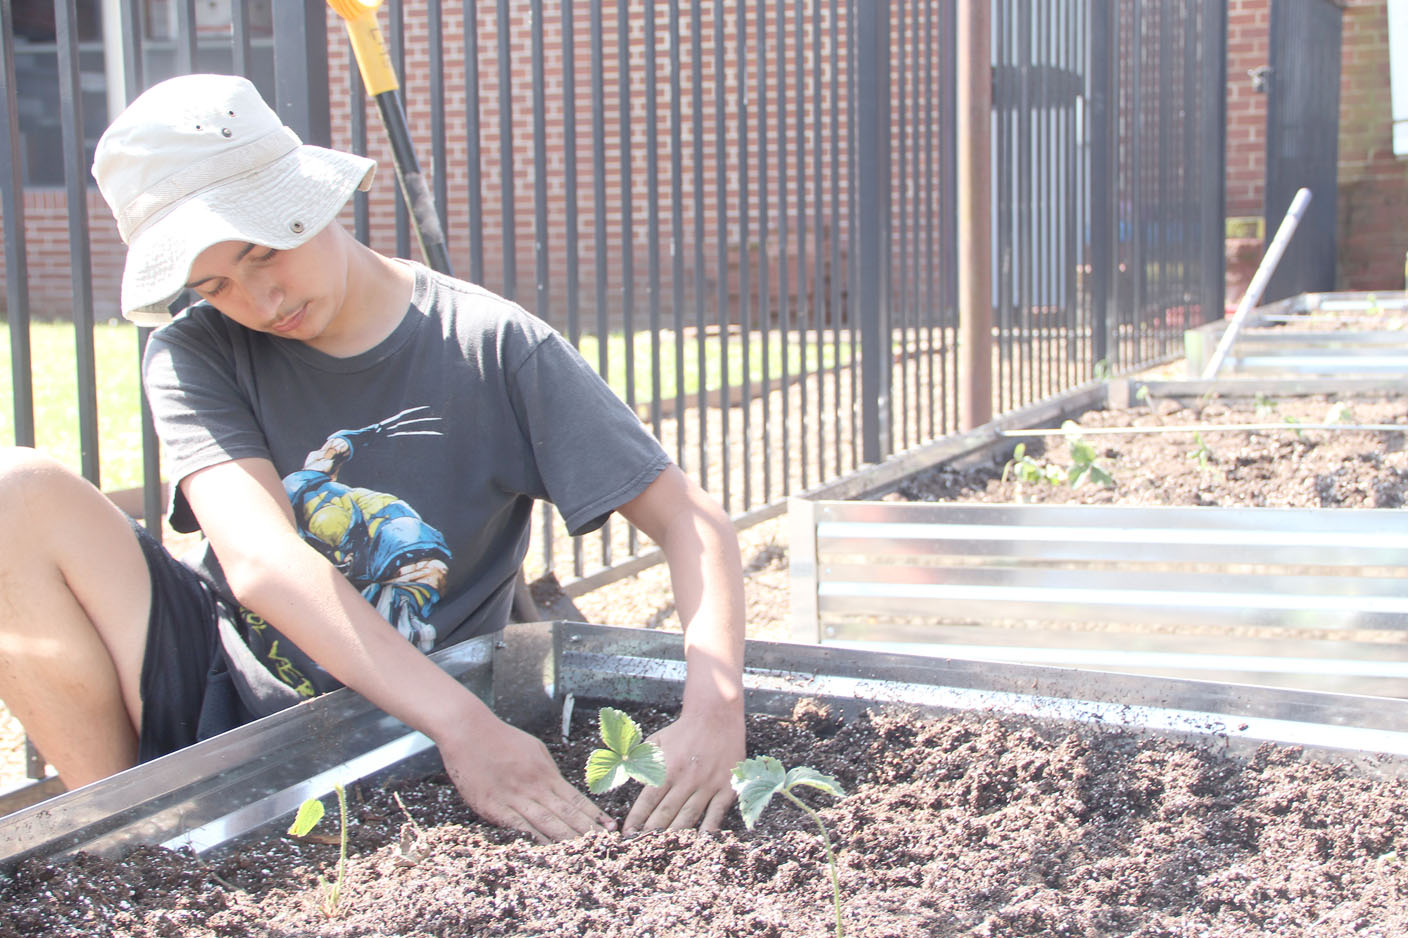 Raised bed garden will supplement middle school meals in Lincoln